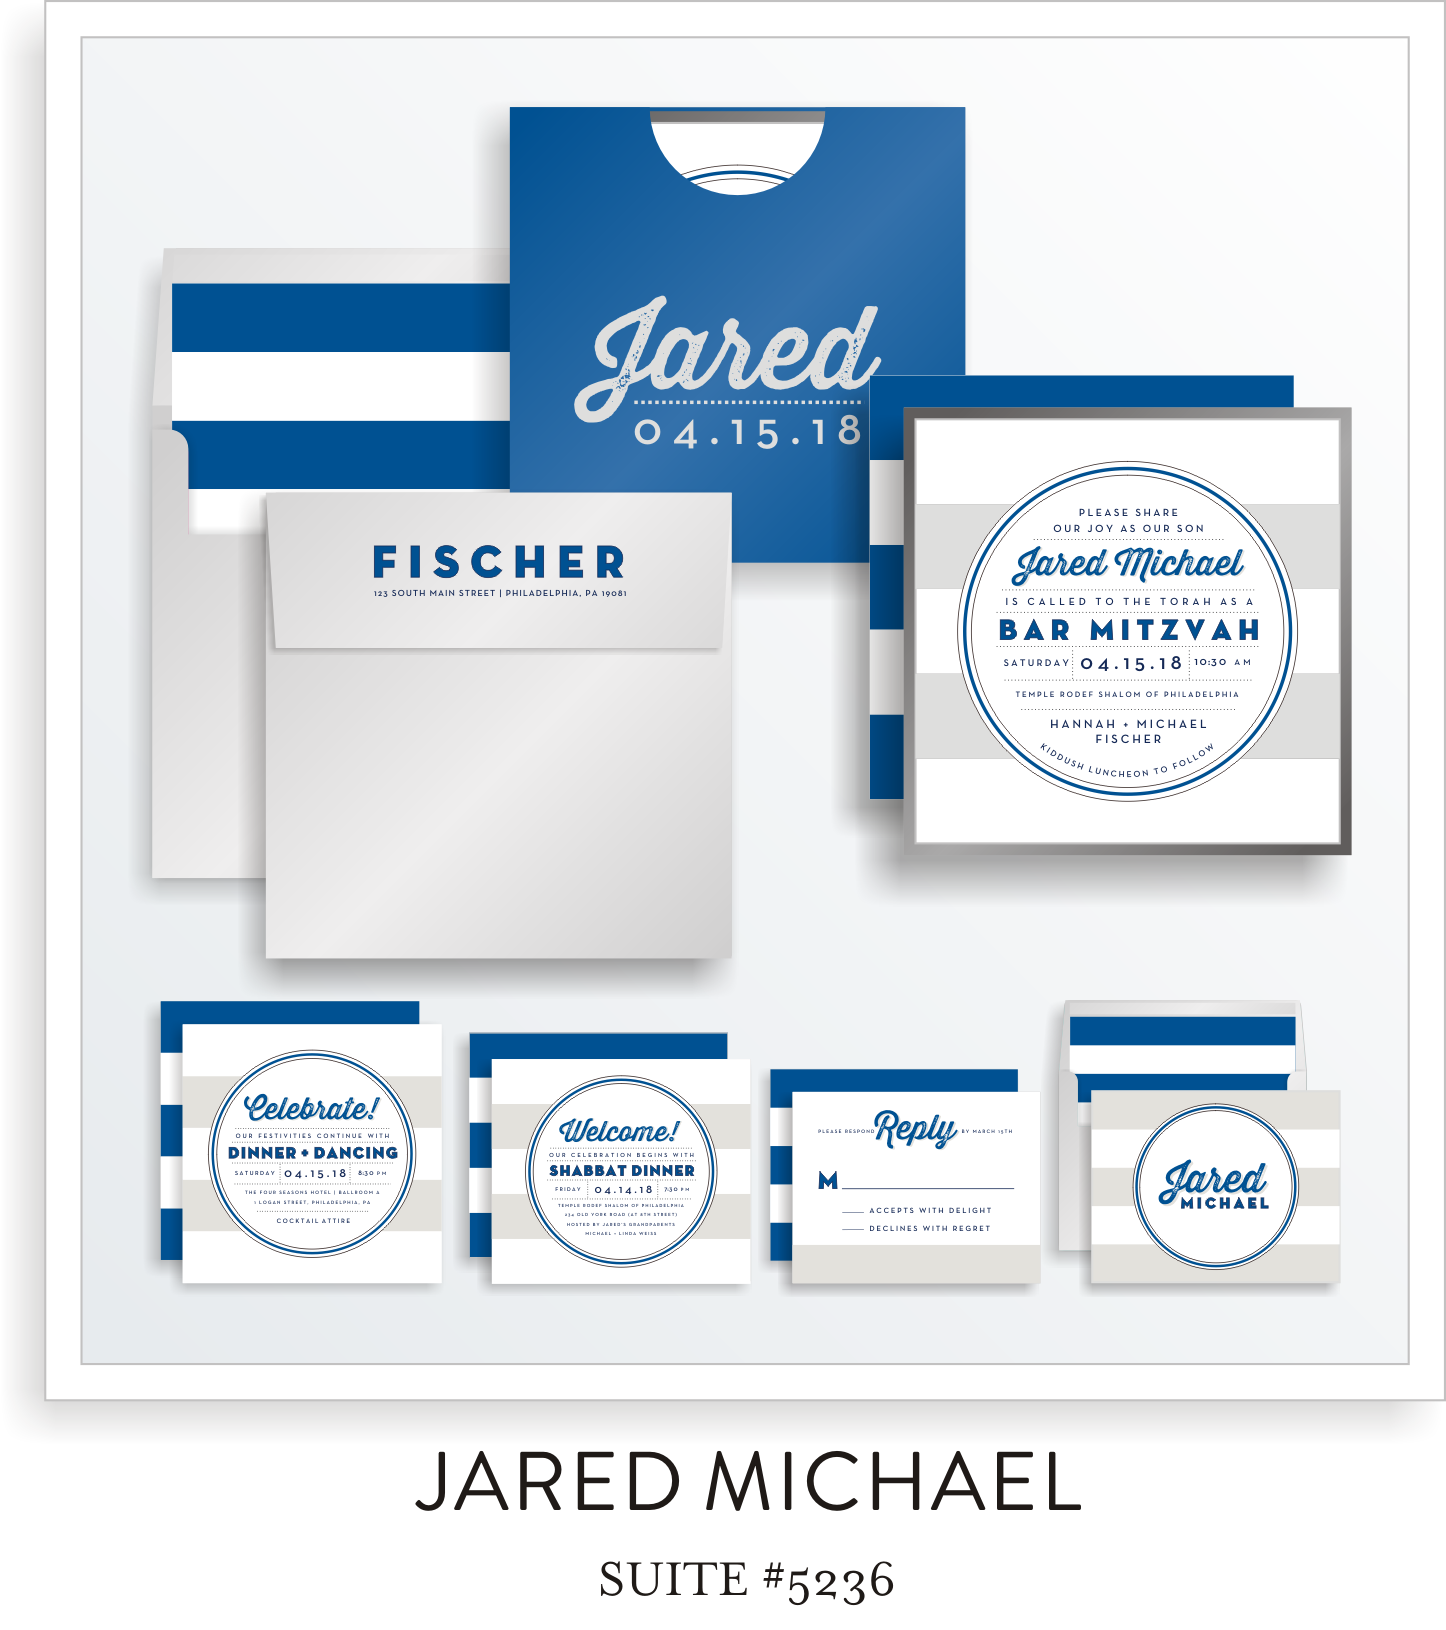 Copy of <a href=/bar-mitzvah-invitations-5236>Suite Details→</a><strong><a href=/jared-michael-in-colors>see more colors→</a></strong> (Copy) (Copy) (Copy) (Copy) (Copy) (Copy) (Copy)